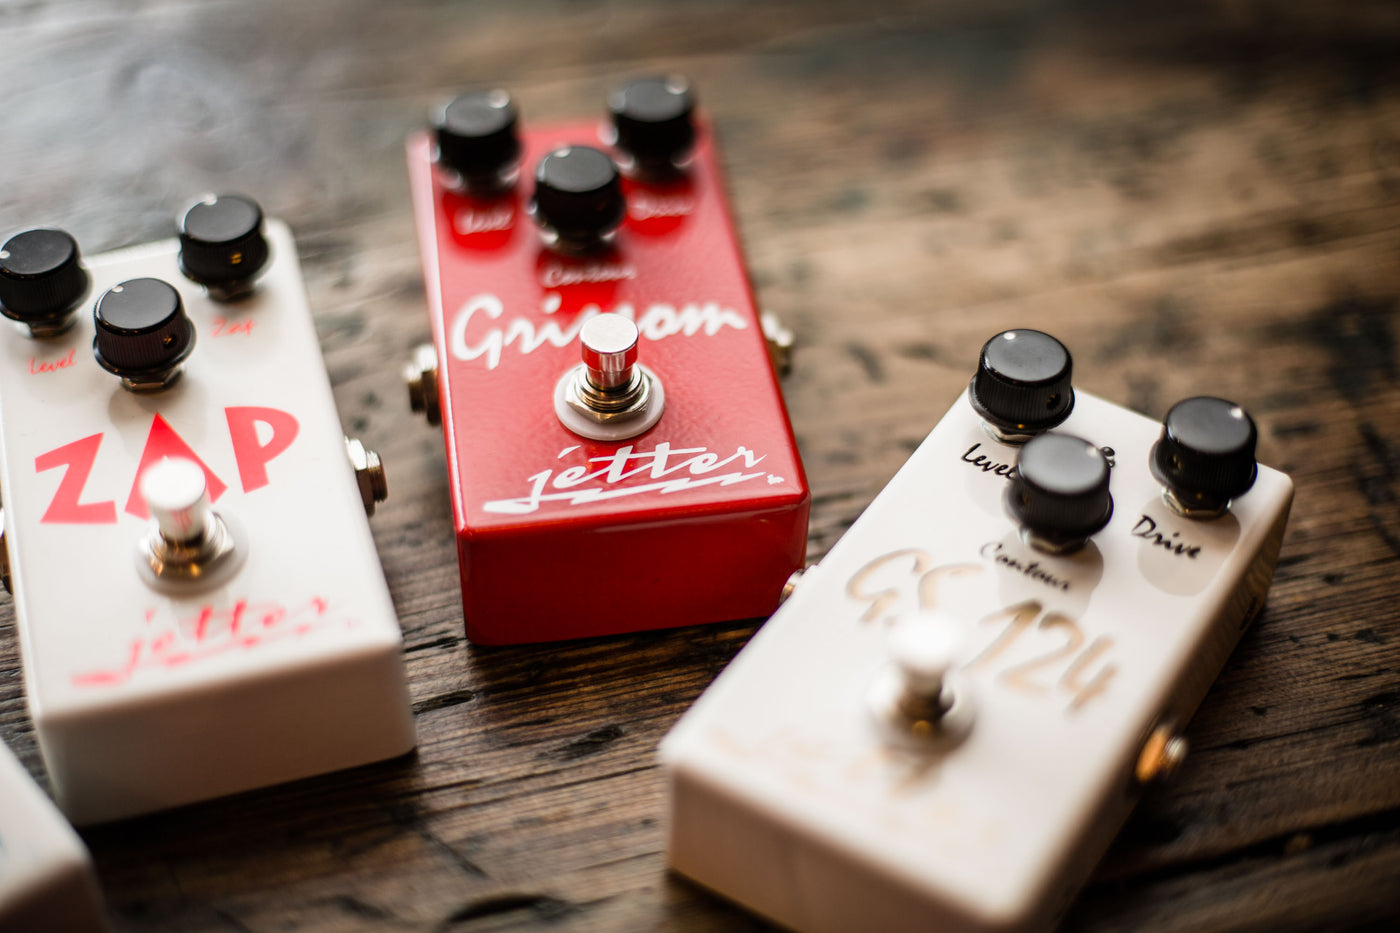 Jetter Pedals